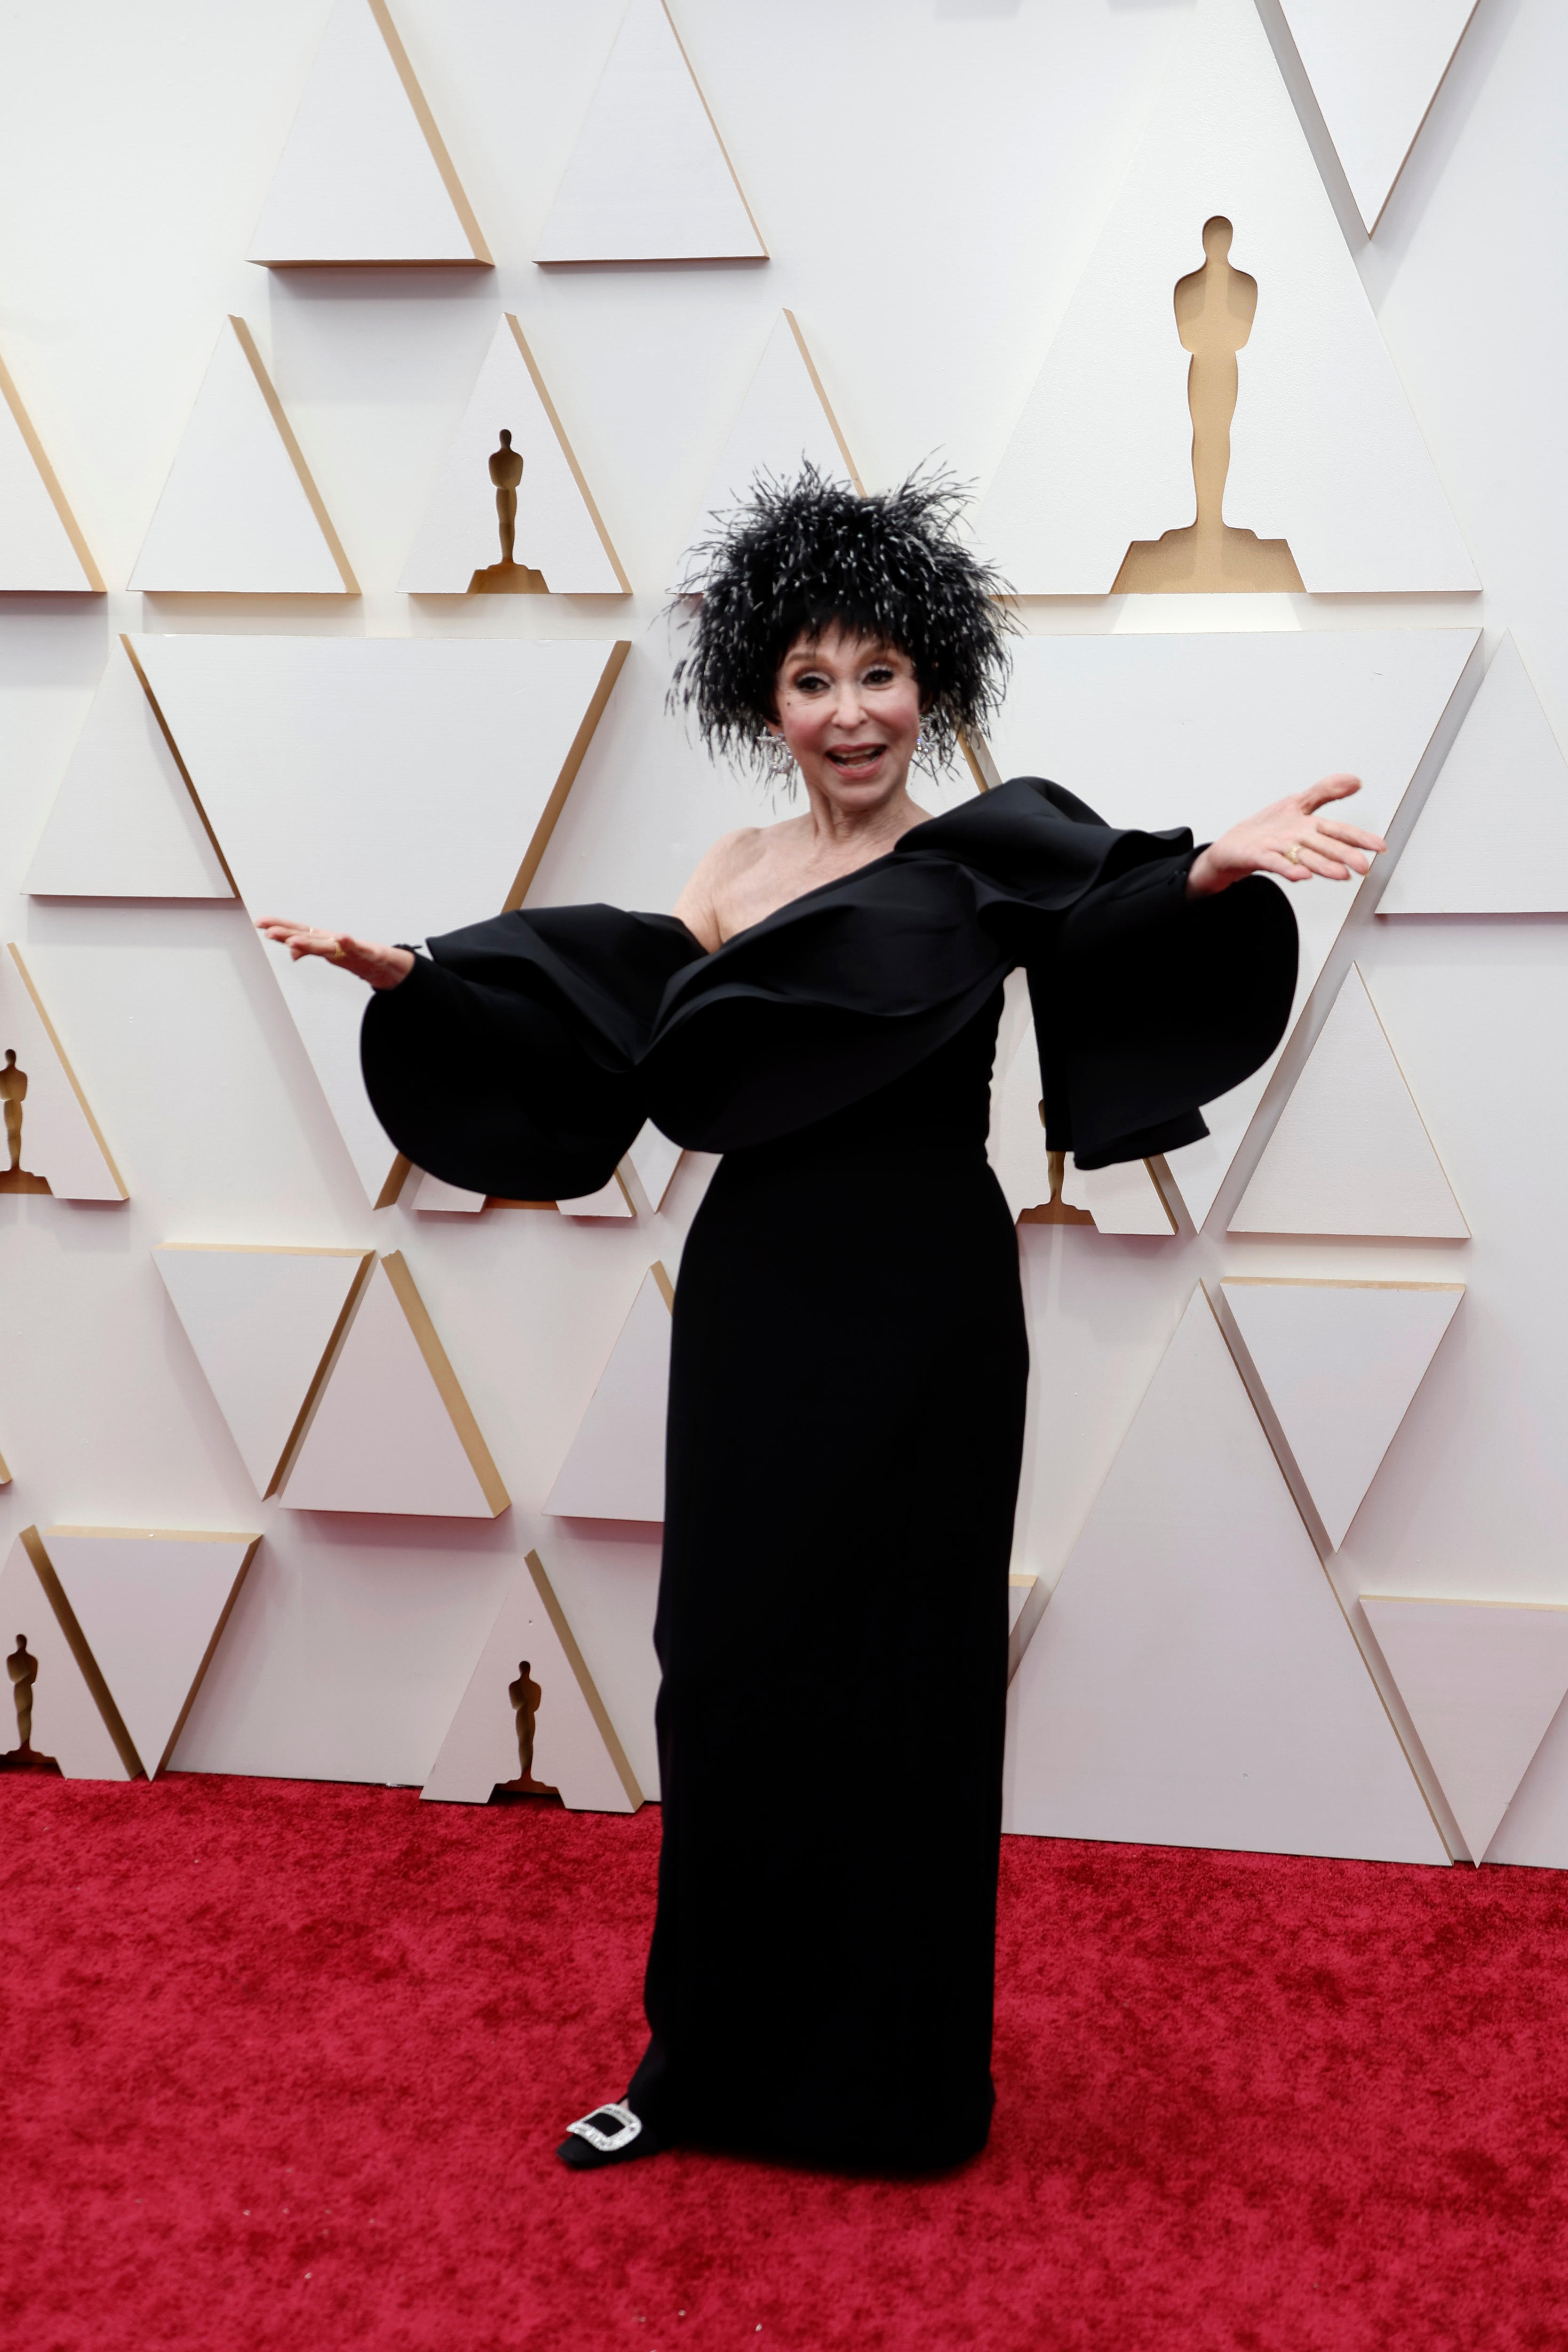 Rita Moreno wearing long black off-the-shoulder gown with a fluffy black metallic hat